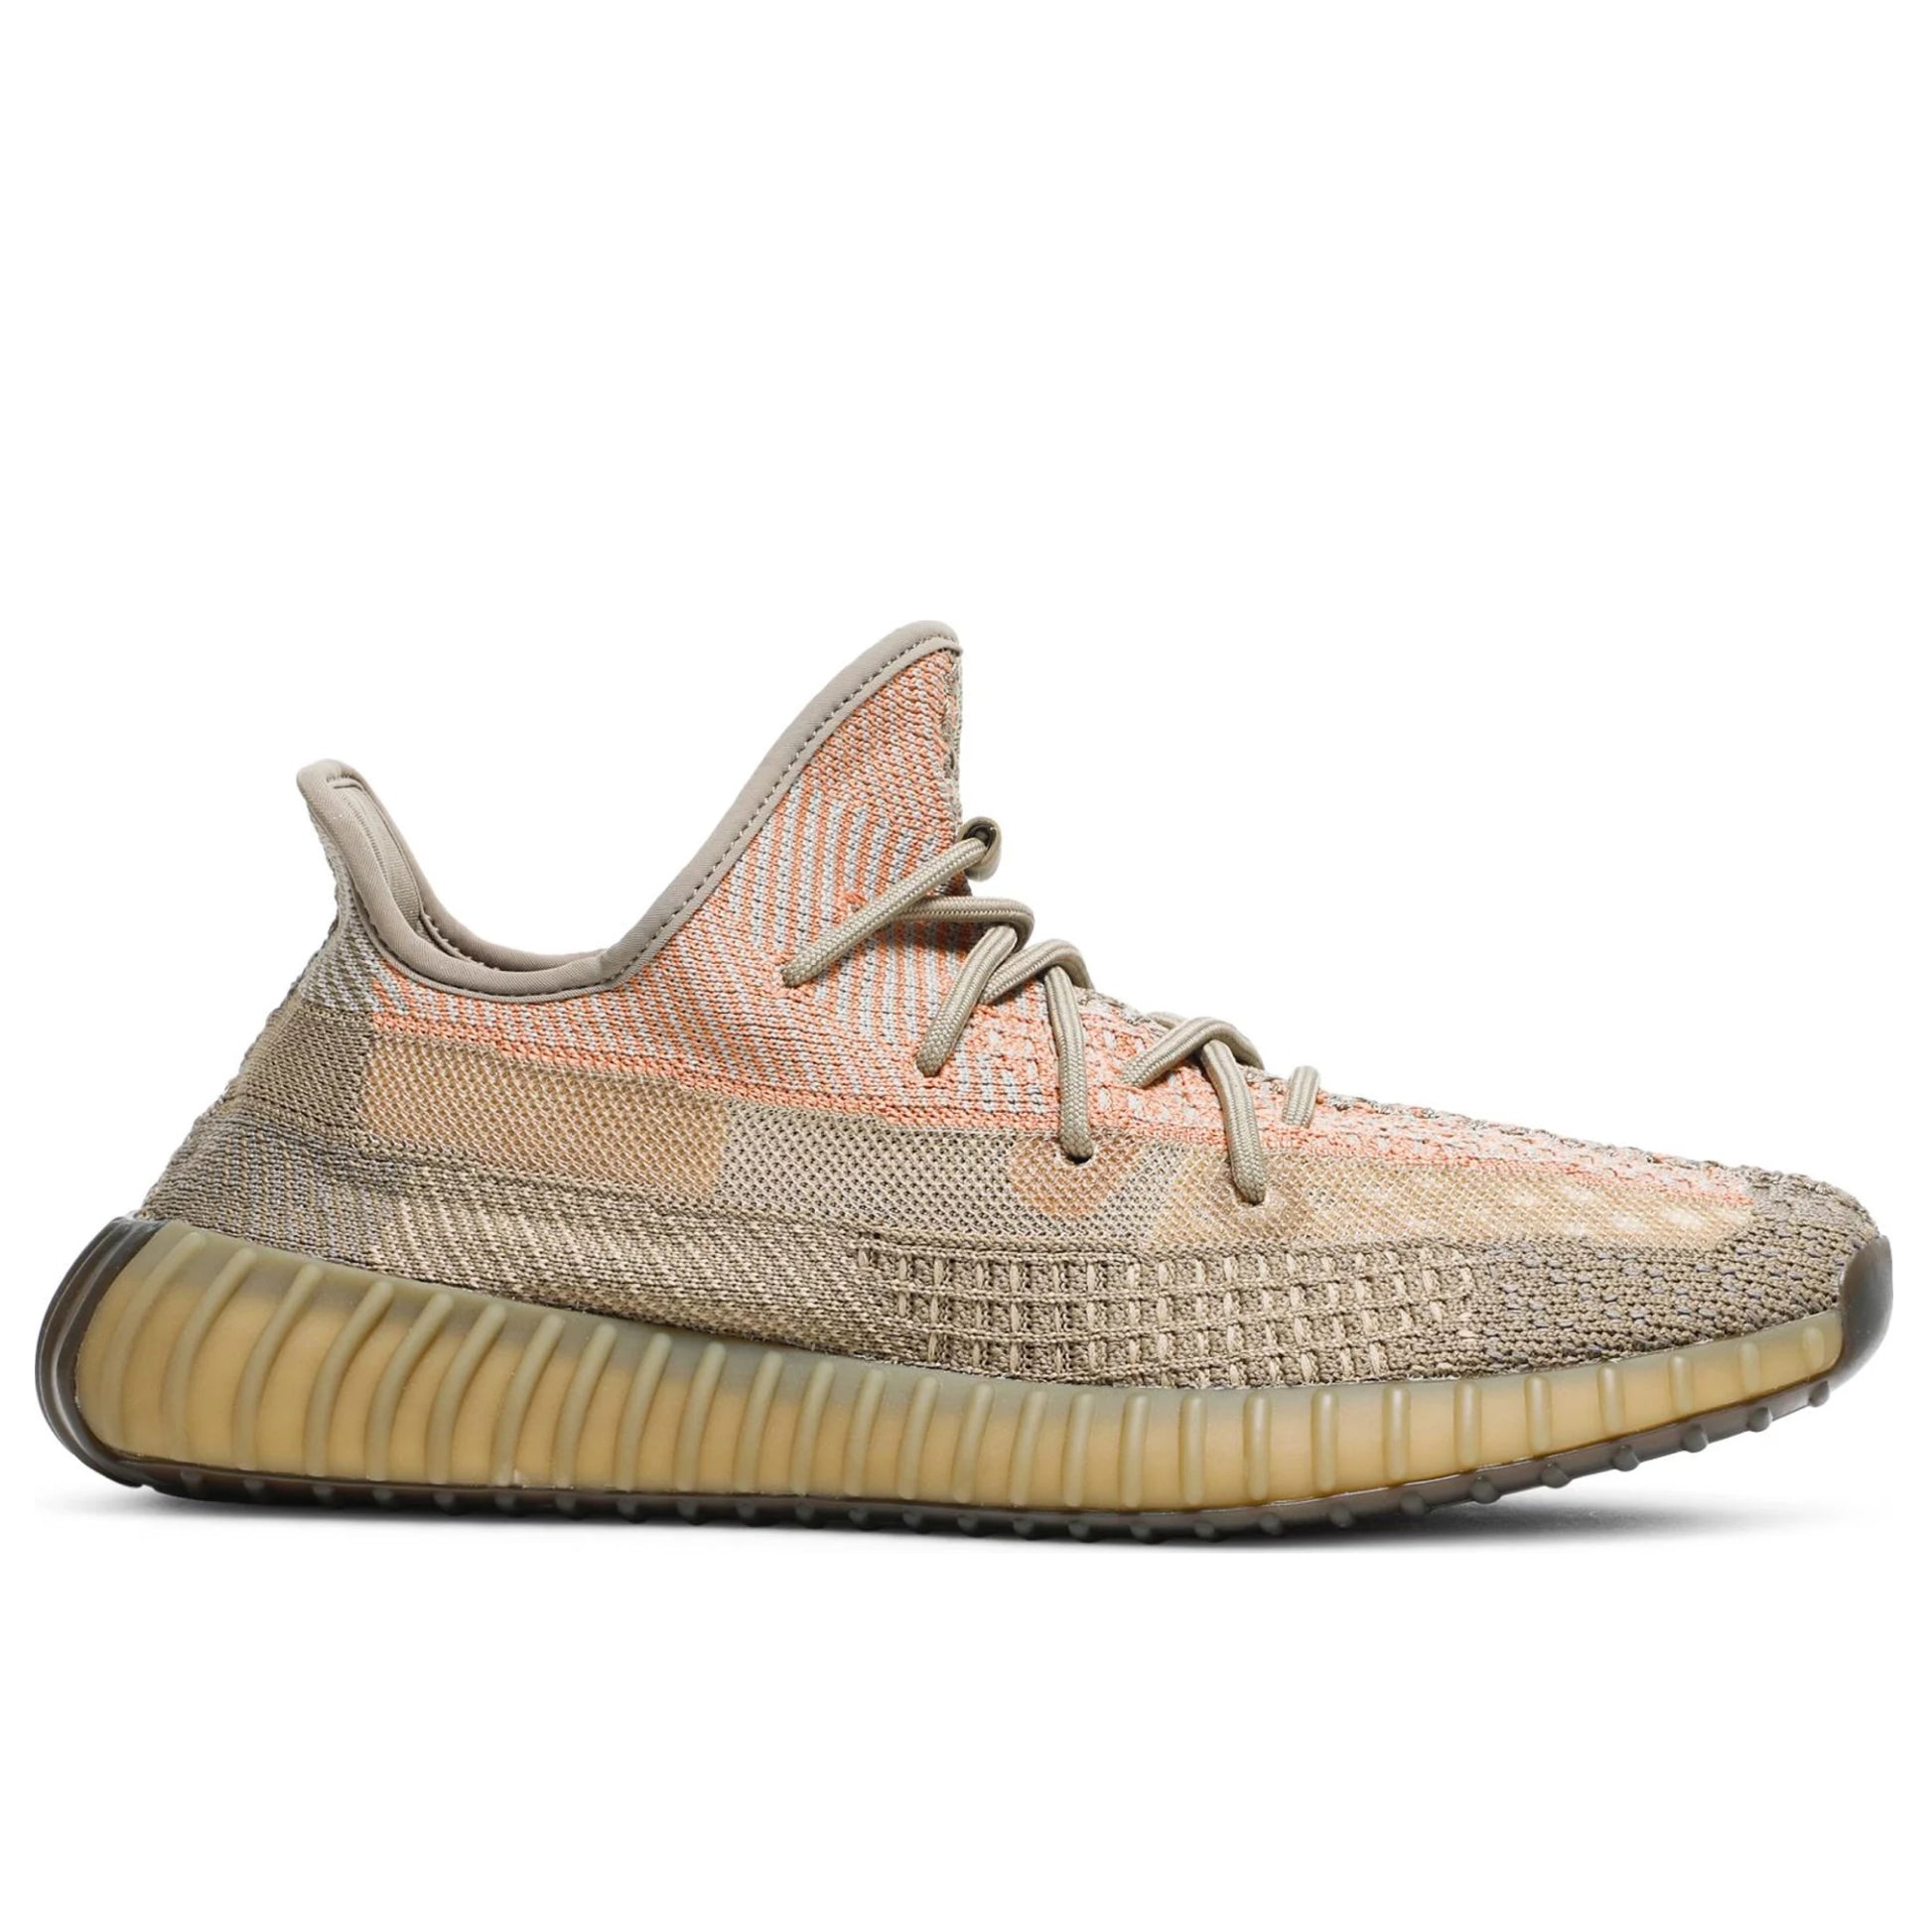 Adidas Yeezy Boost 350 V2 Sand Taupe Yeezy